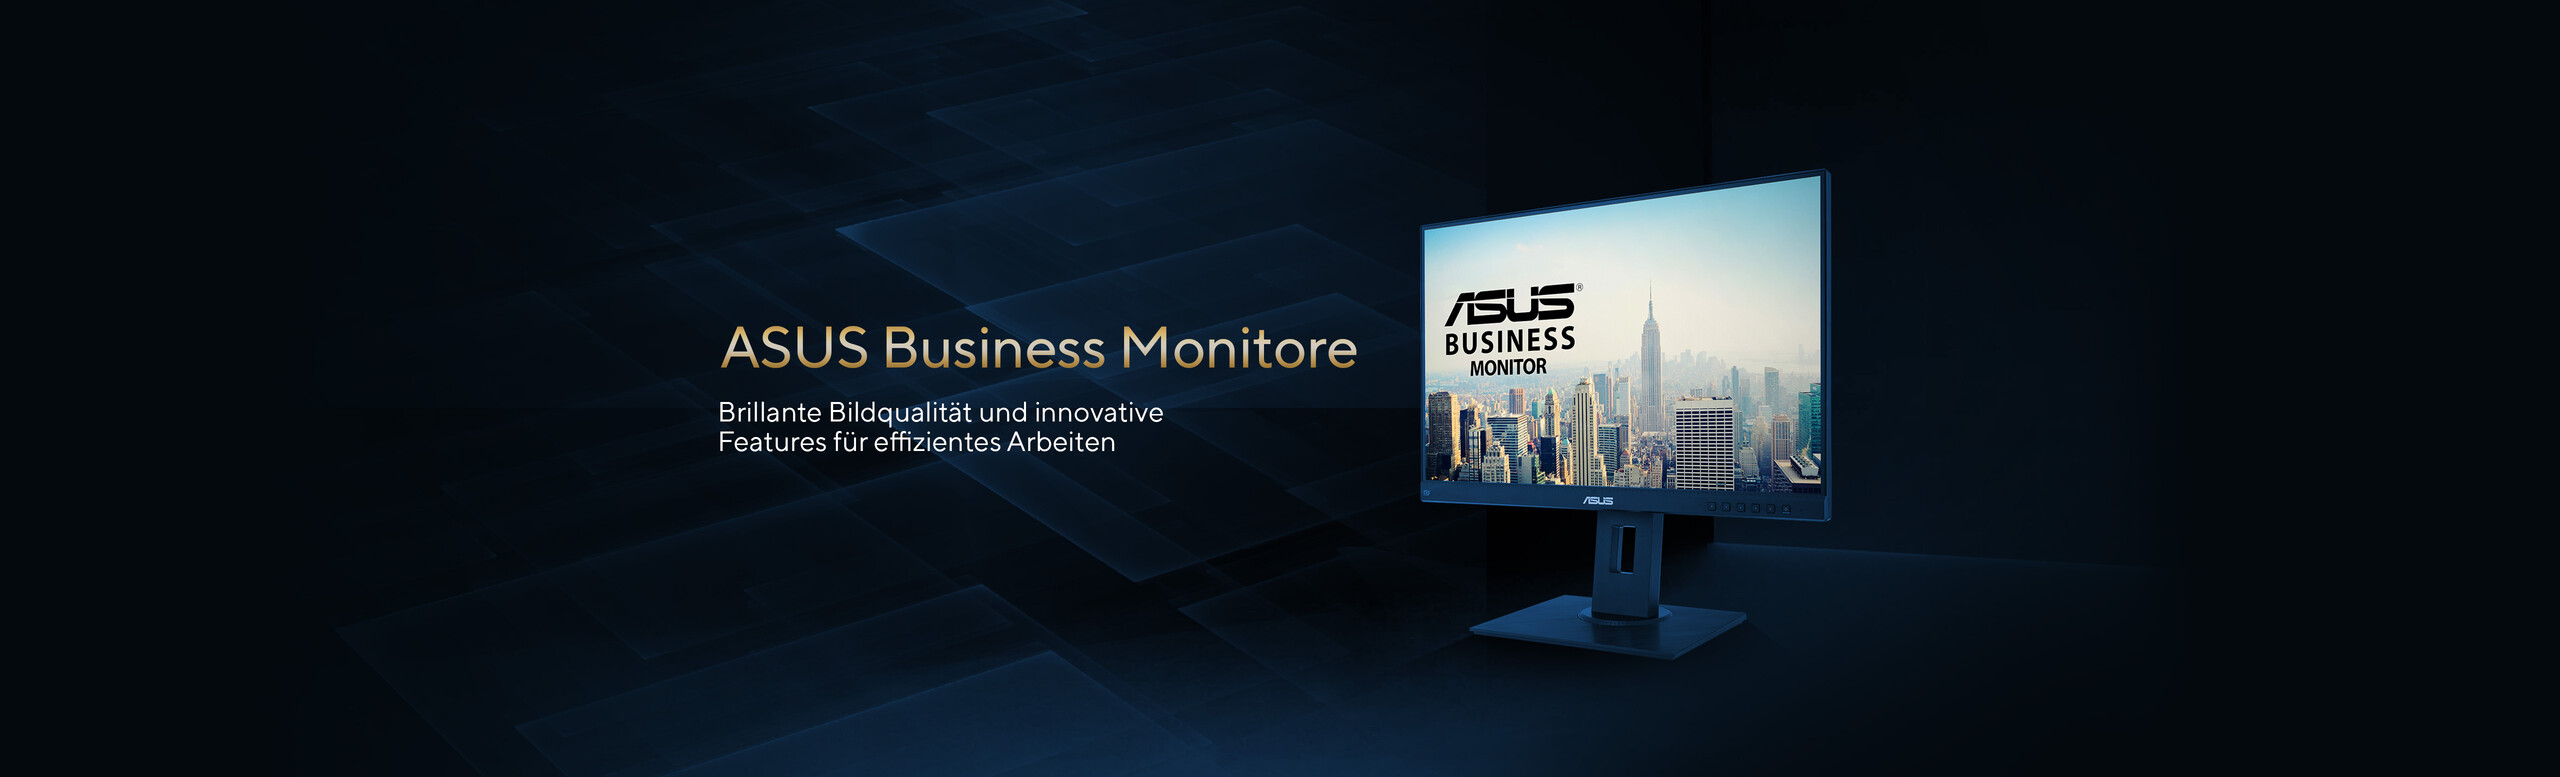 ASUS Business Monitore